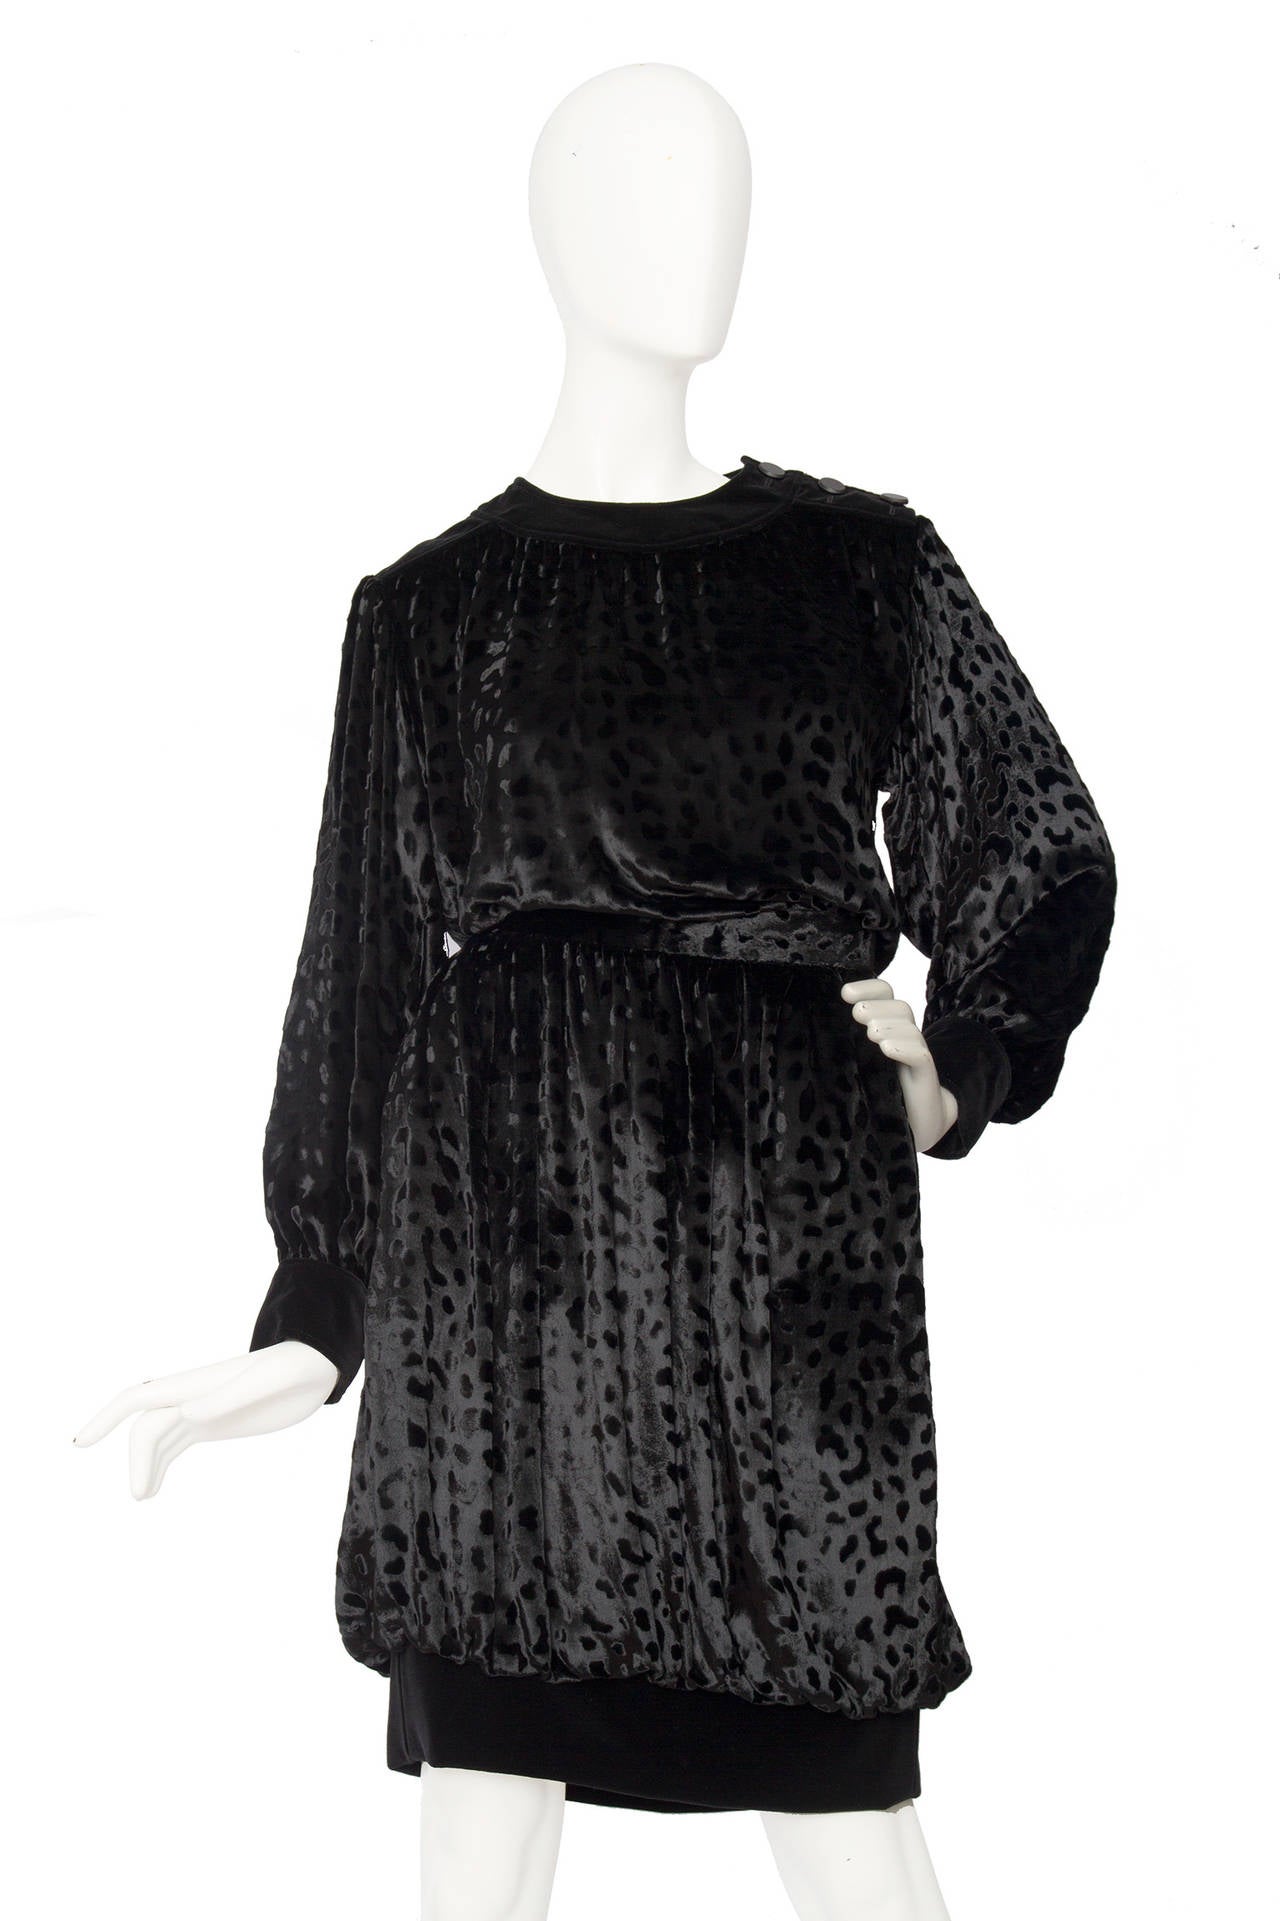 A 1980s Yves Saint Laurent two-piece black silk velvet ensemble consisting of a loosely fitted blouse and a balloon skirt. 
The blouse has a wide velvet trim around each cuff and around the neckline, which is completed by a three-buttoned opening